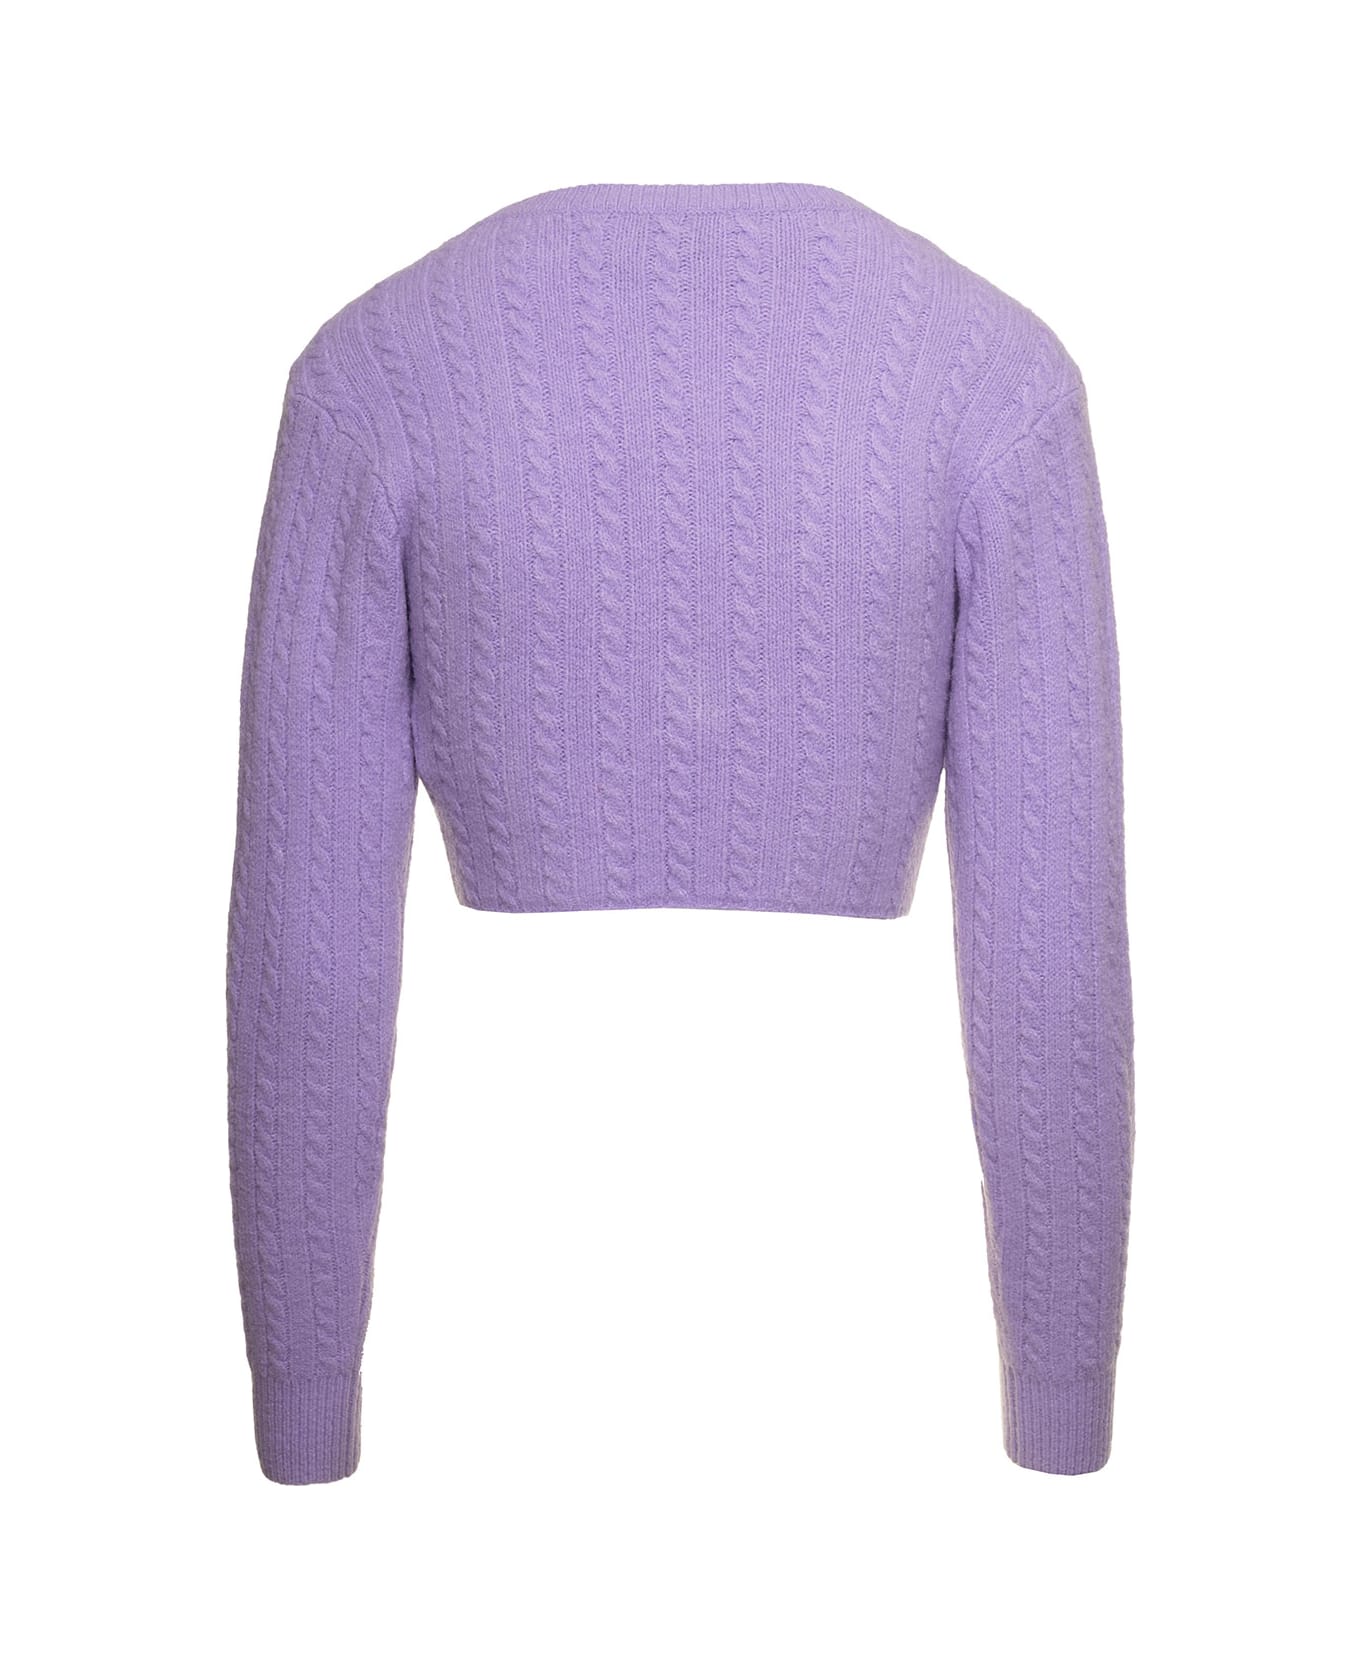 Chiara Ferragni Purple Cable-knit Cropped Cardigan With Embroidered Logo In Stretch Wool Blend Woman - Lilac カーディガン